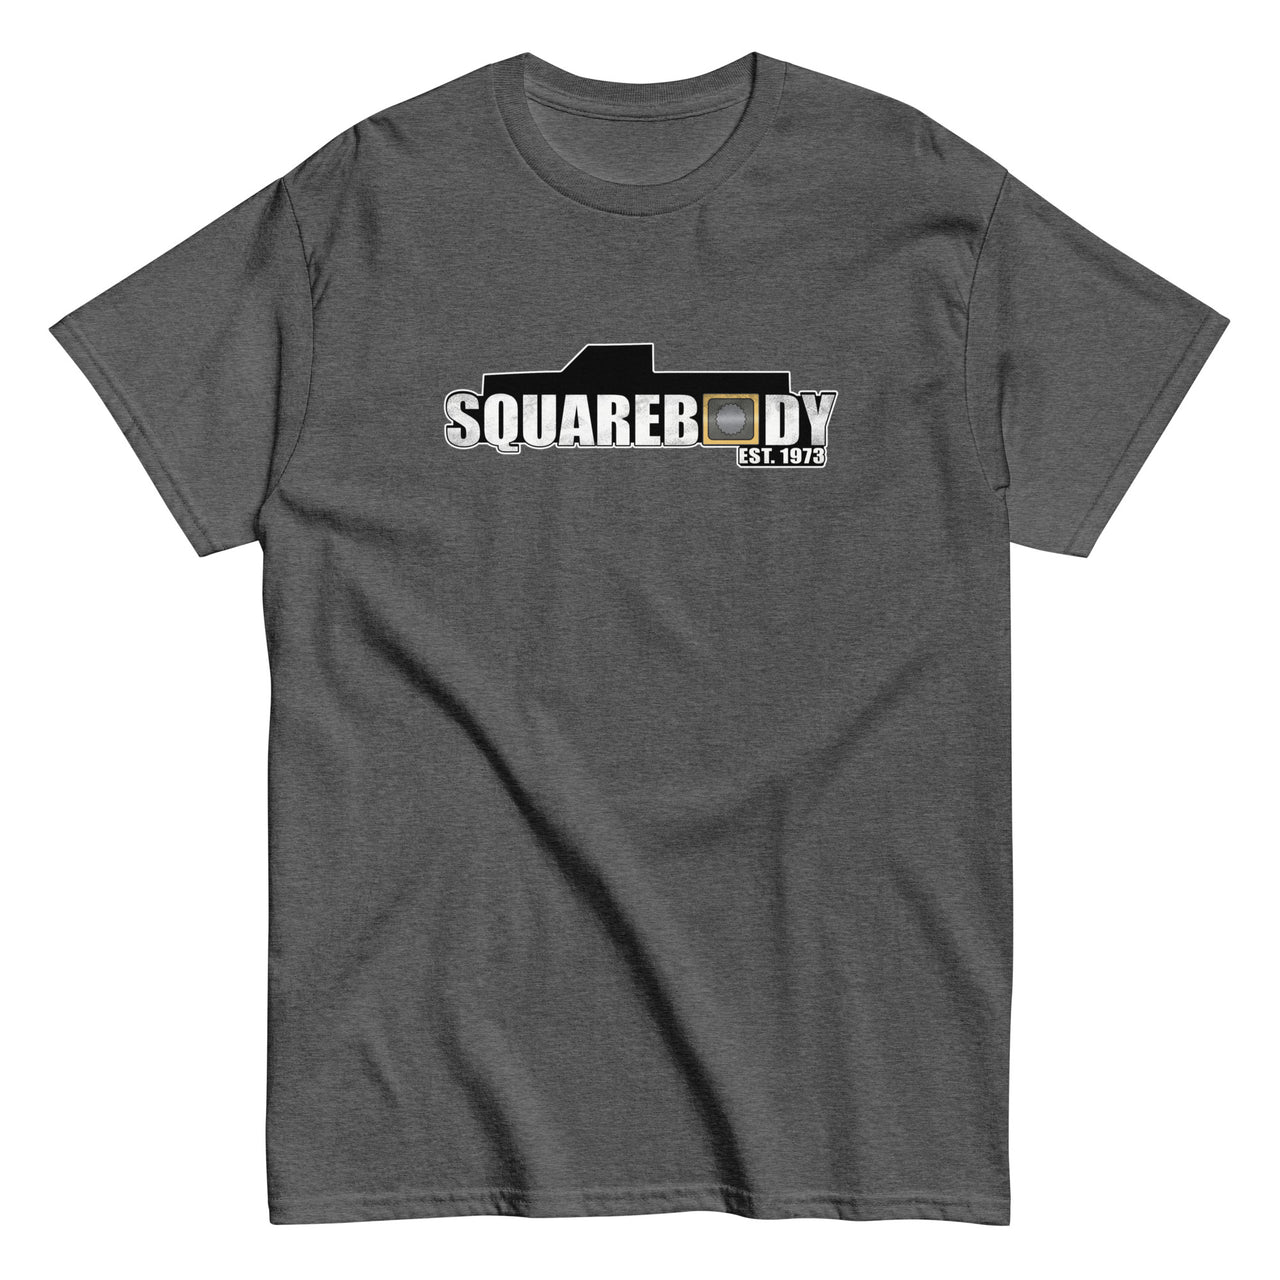 Square Body Est 1973 T-Shirt in grey